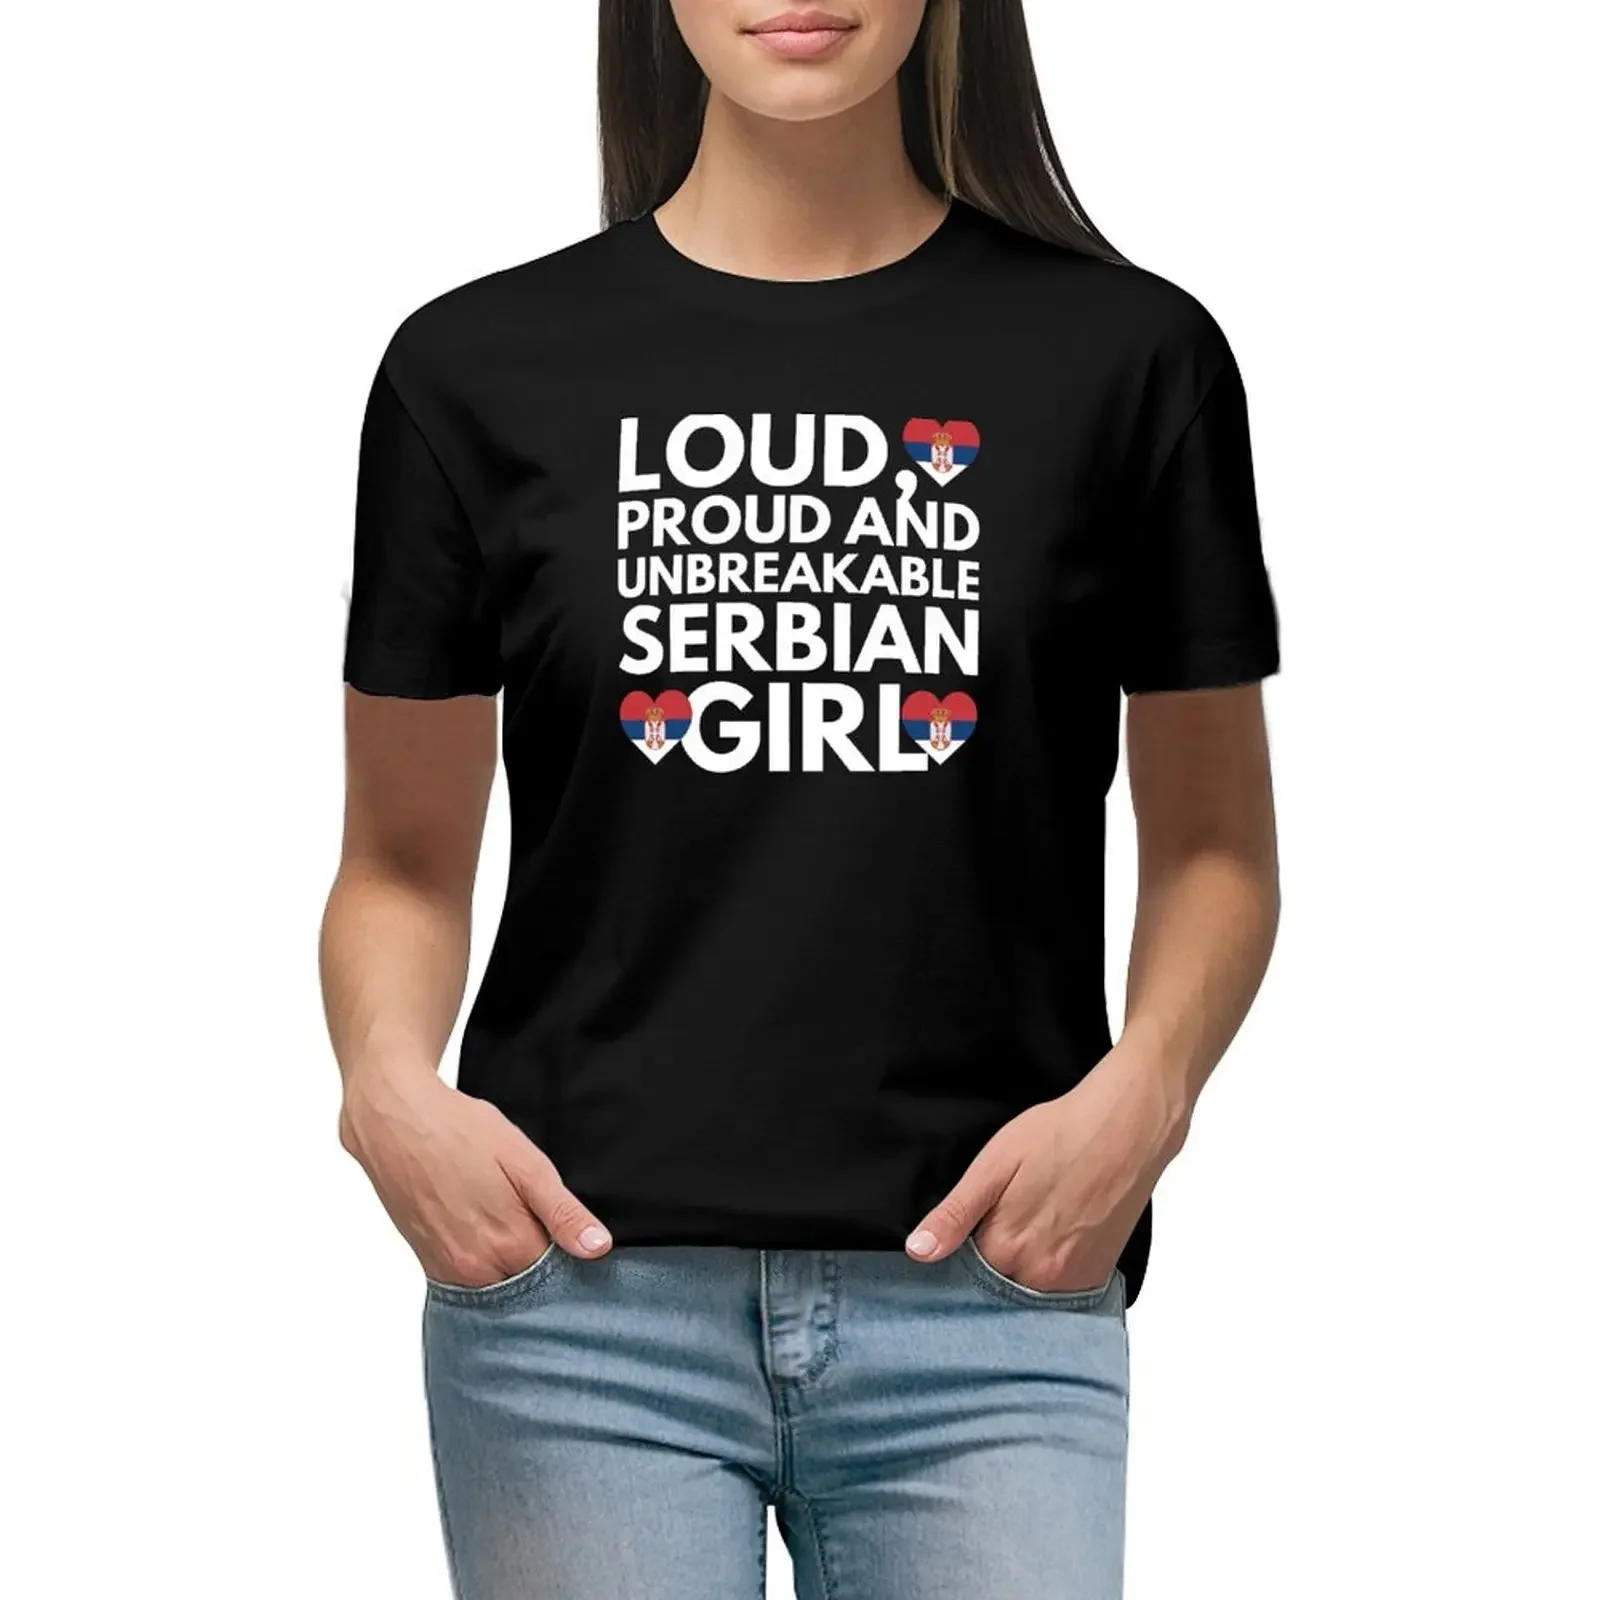 

Loud, Proud and Unbreakable Serbian Girl from Serbia T-shirt korean fashion aesthetic clothes Woman clothing